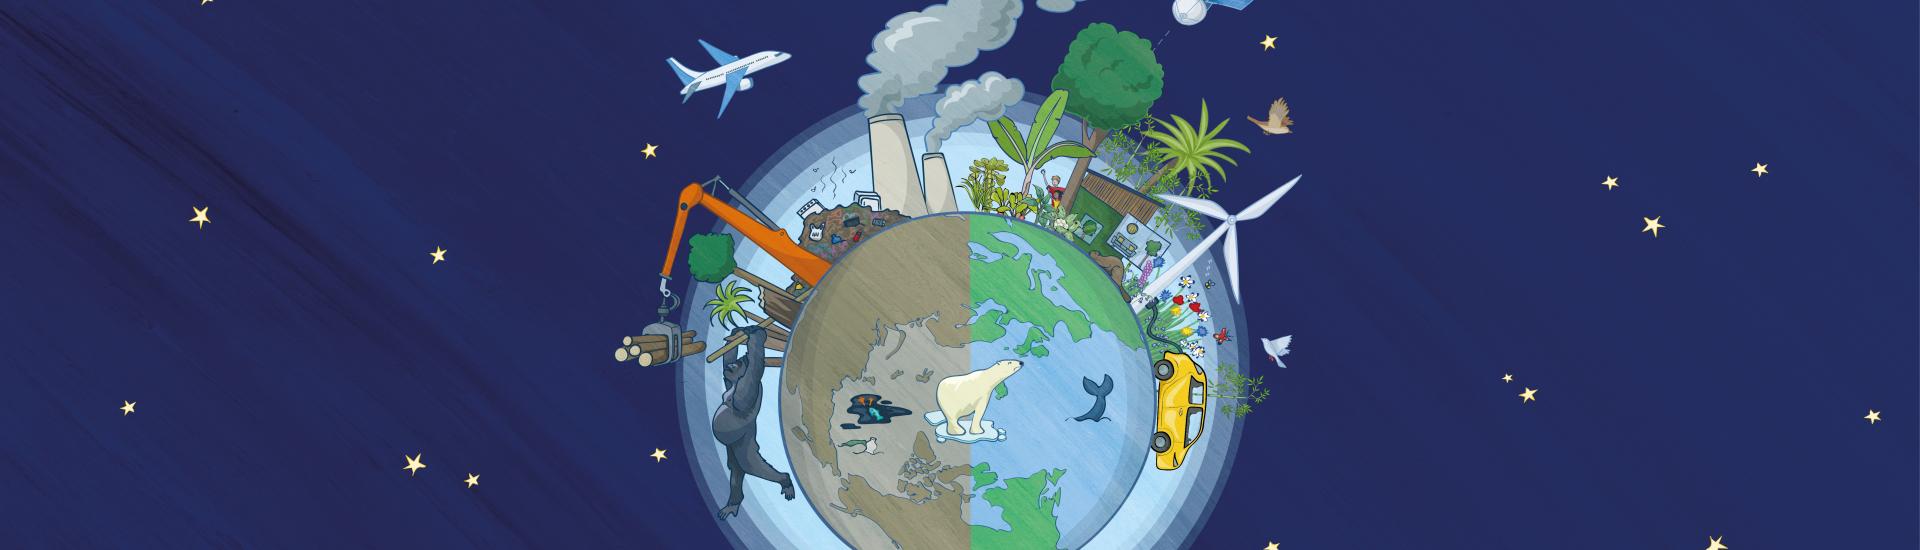 Illustration of the world with half being destroyed and the other half using eco solutions to thrive